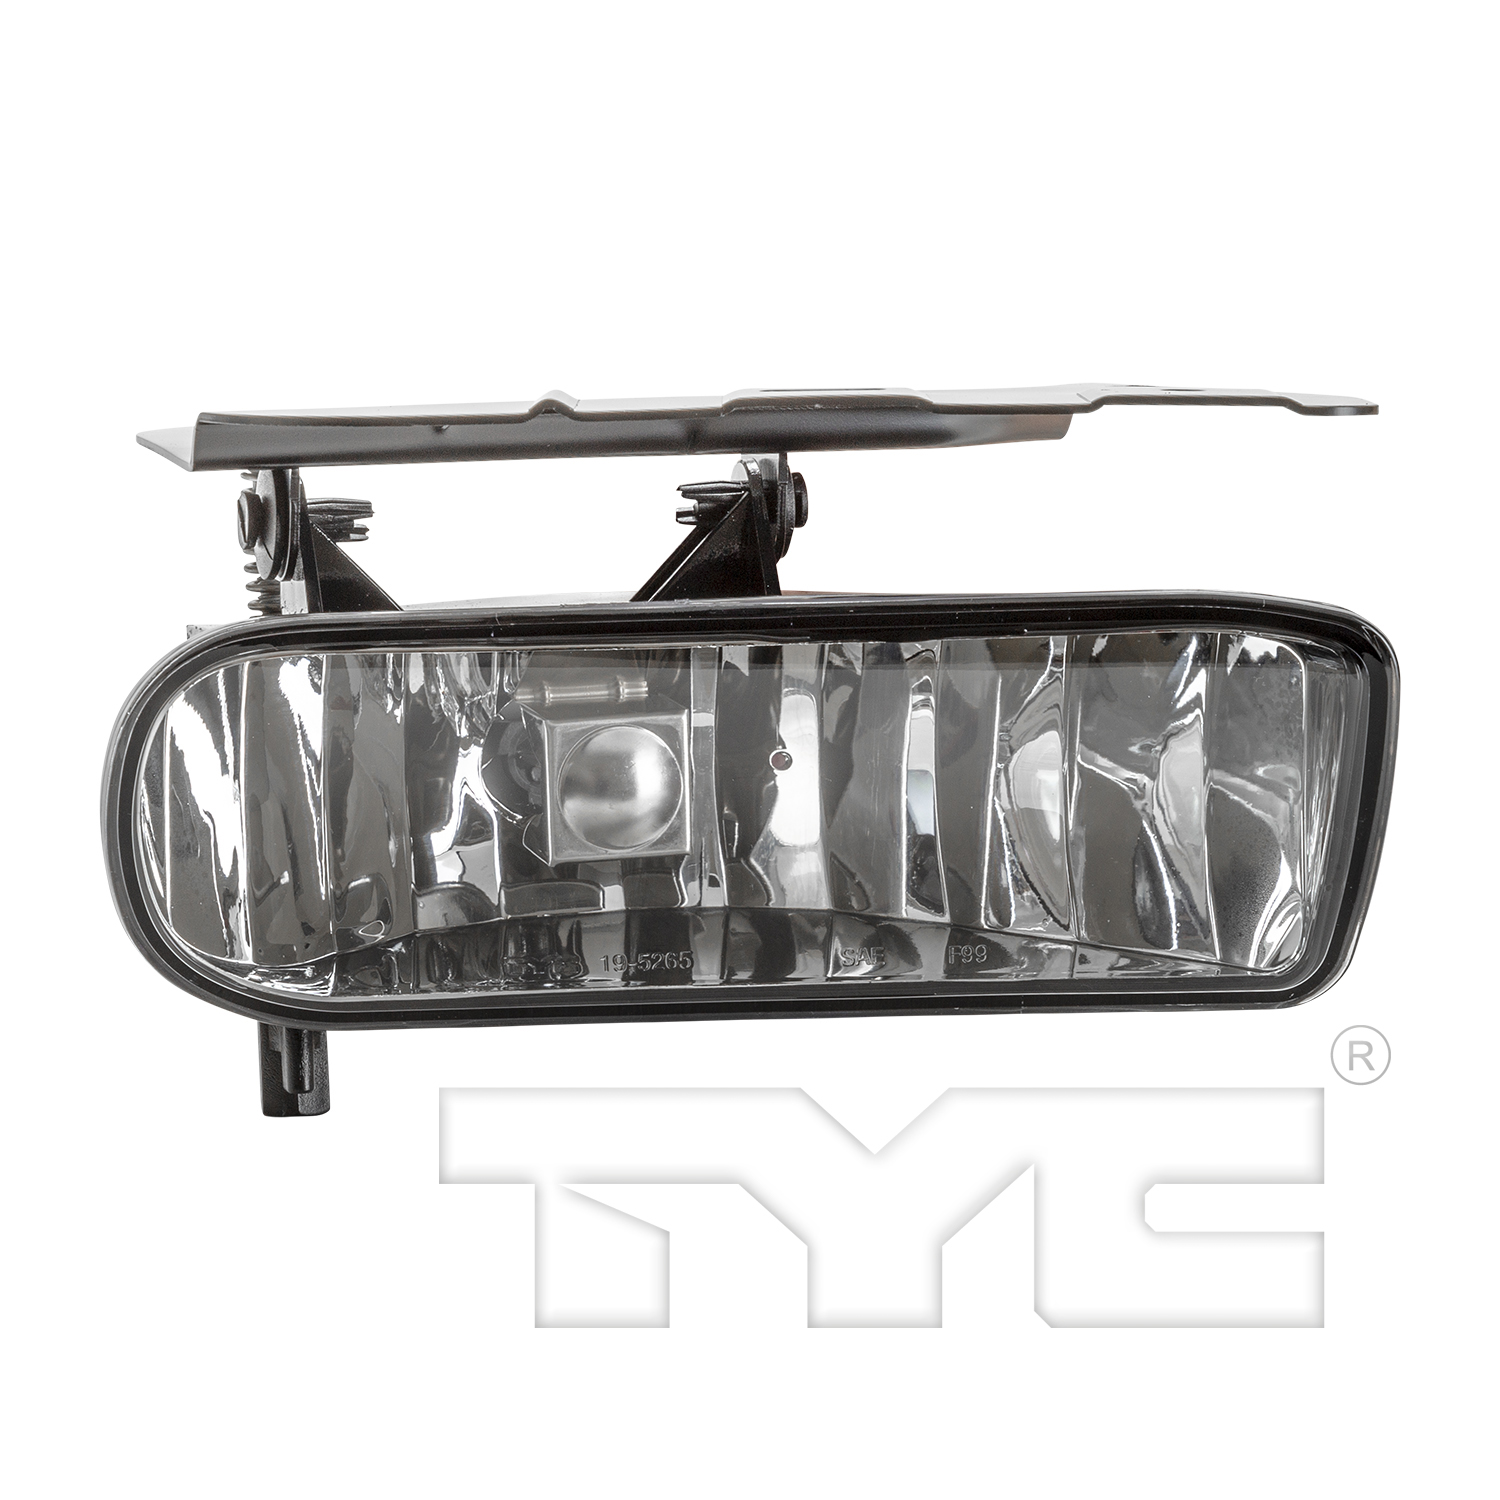 Aftermarket FOG LIGHTS for CADILLAC - ESCALADE EXT, ESCALADE EXTENSION,03-05,RT Fog lamp assy